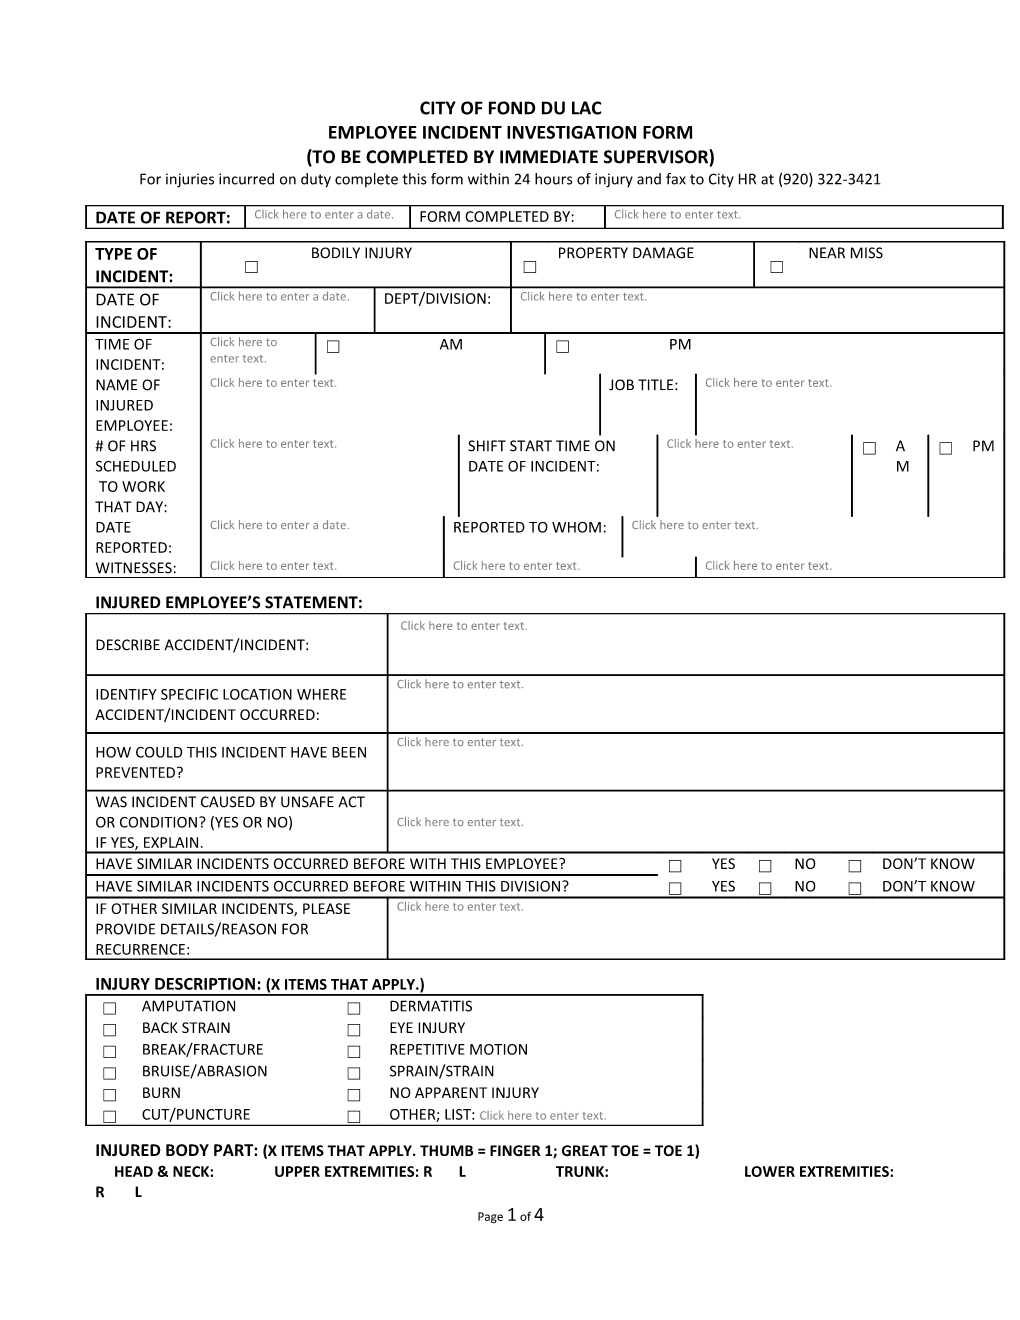 Employee Incident Investigation Form